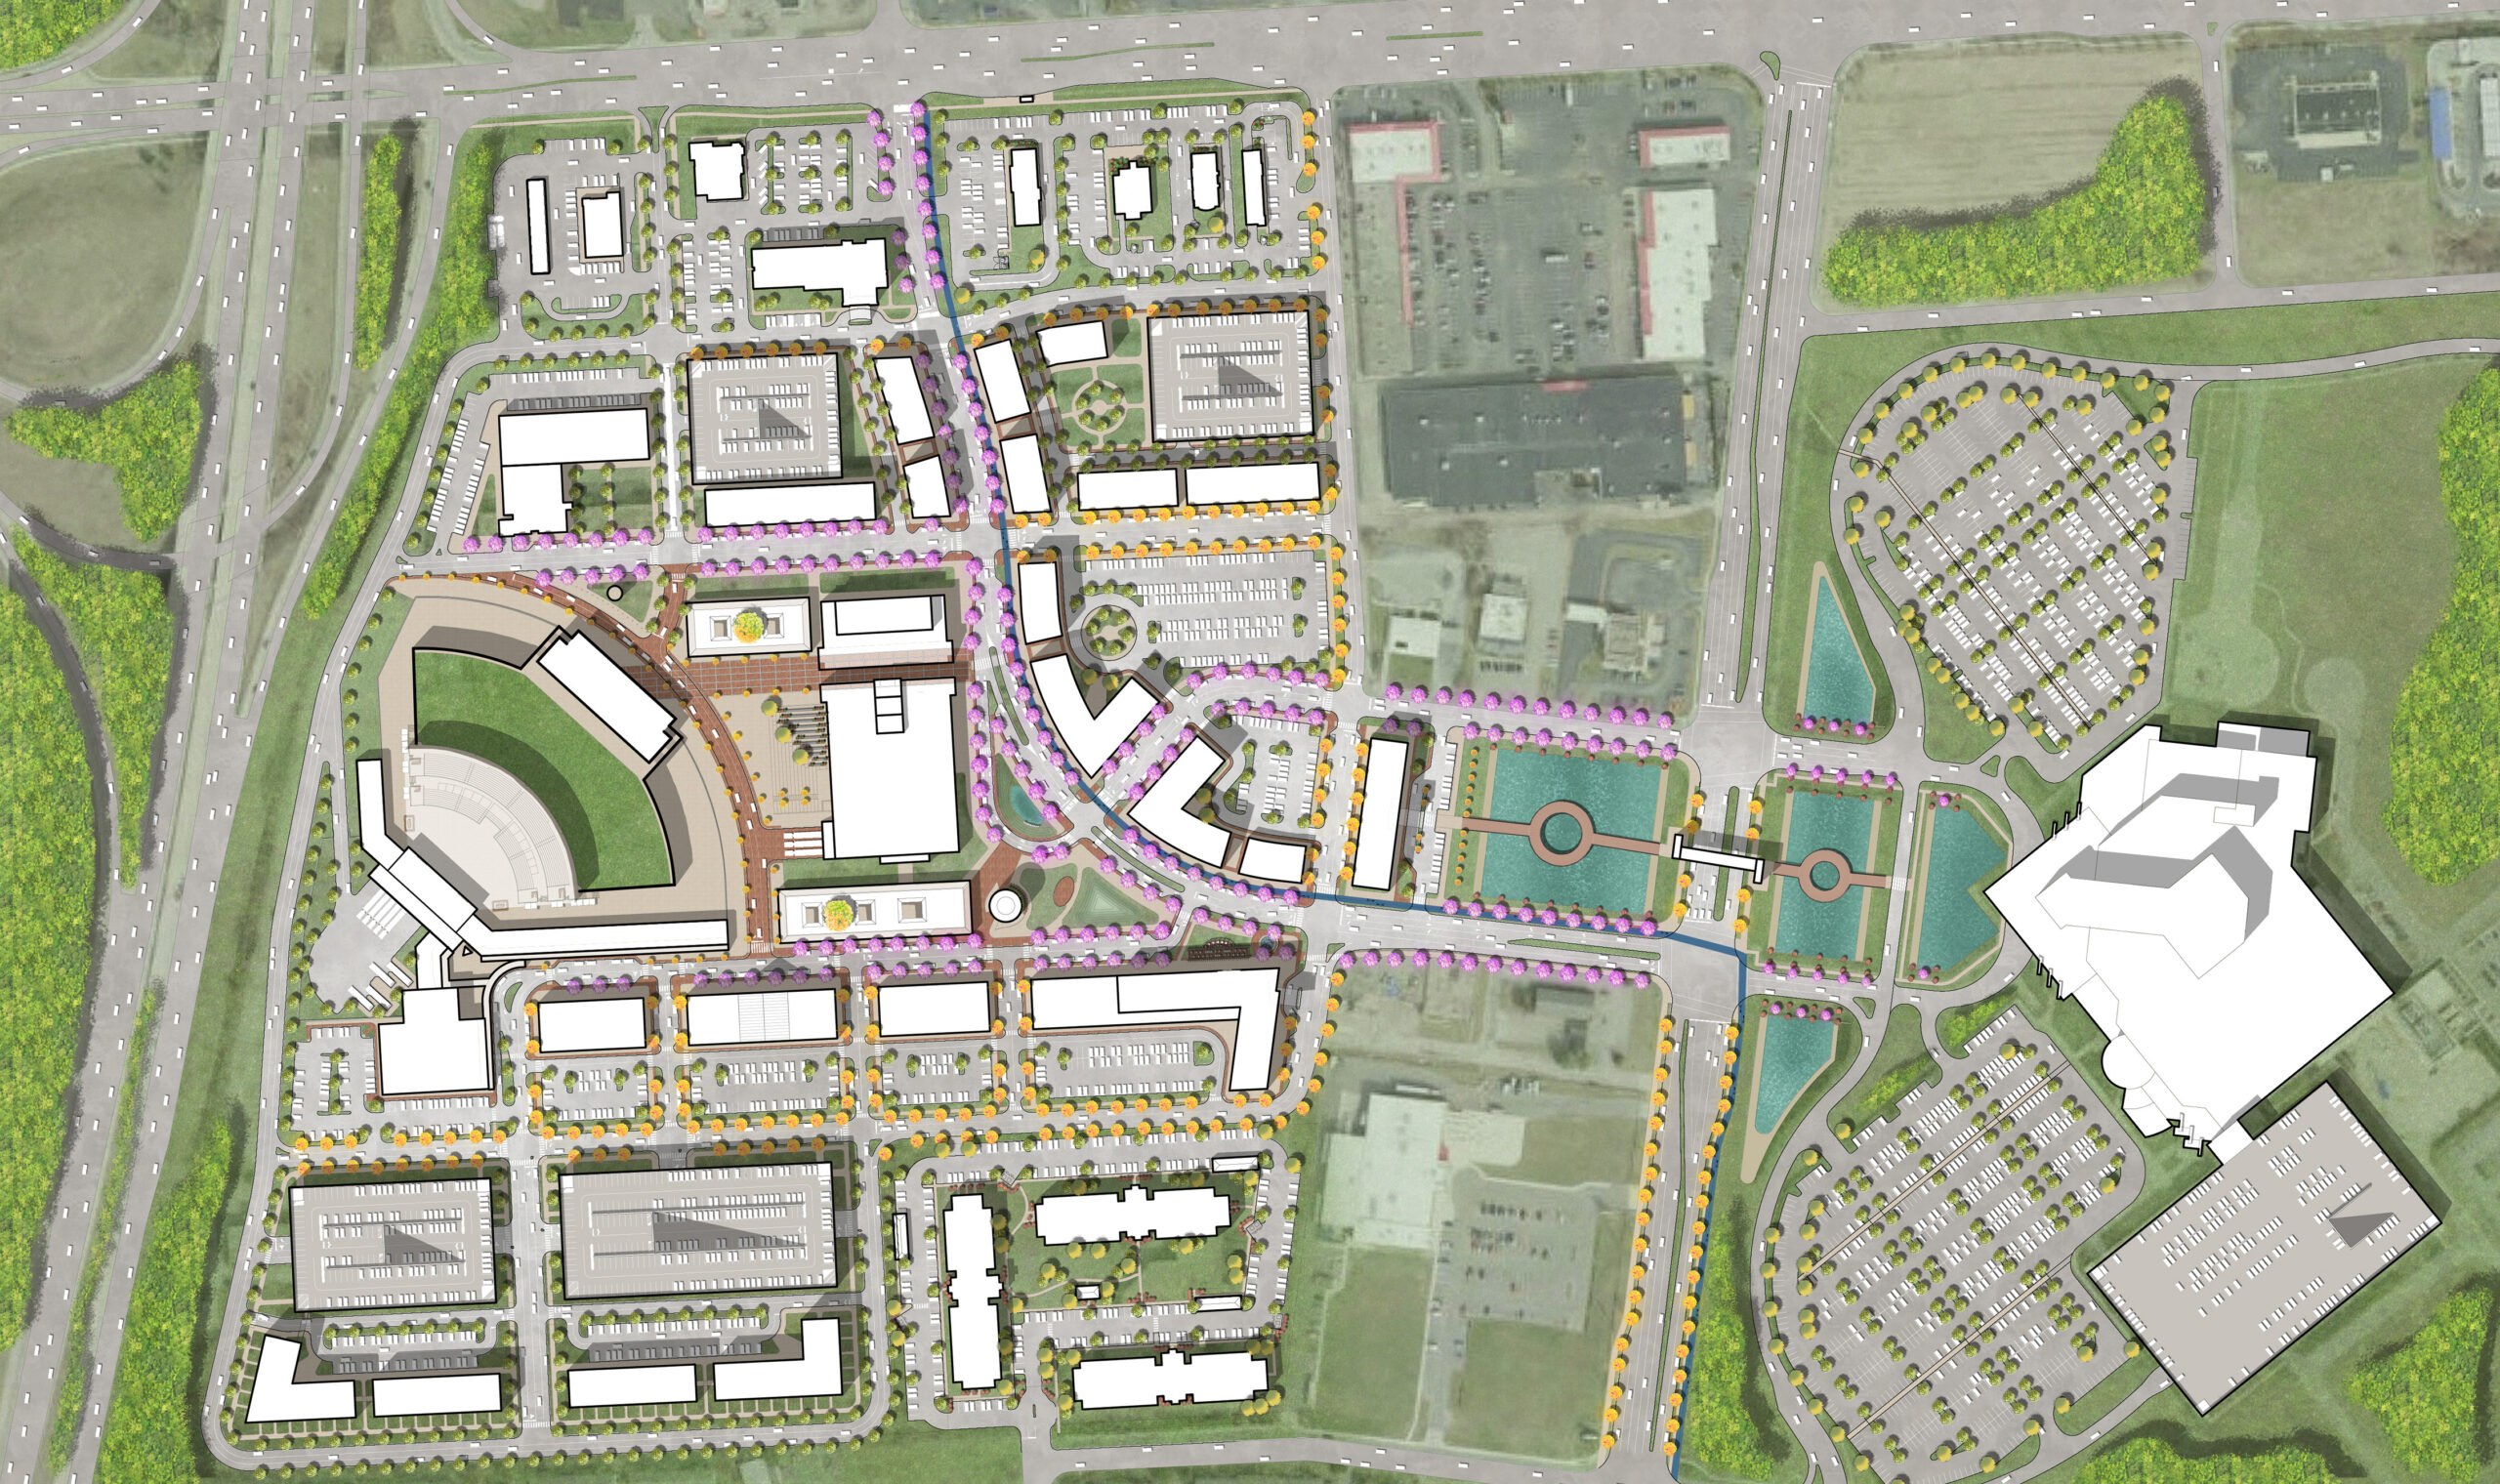 Top-down view that is an illustration of the Weston site plan, which includes buildings, roads, parking lots, and sidewalks. It shows the location of the site near to a major highway system.